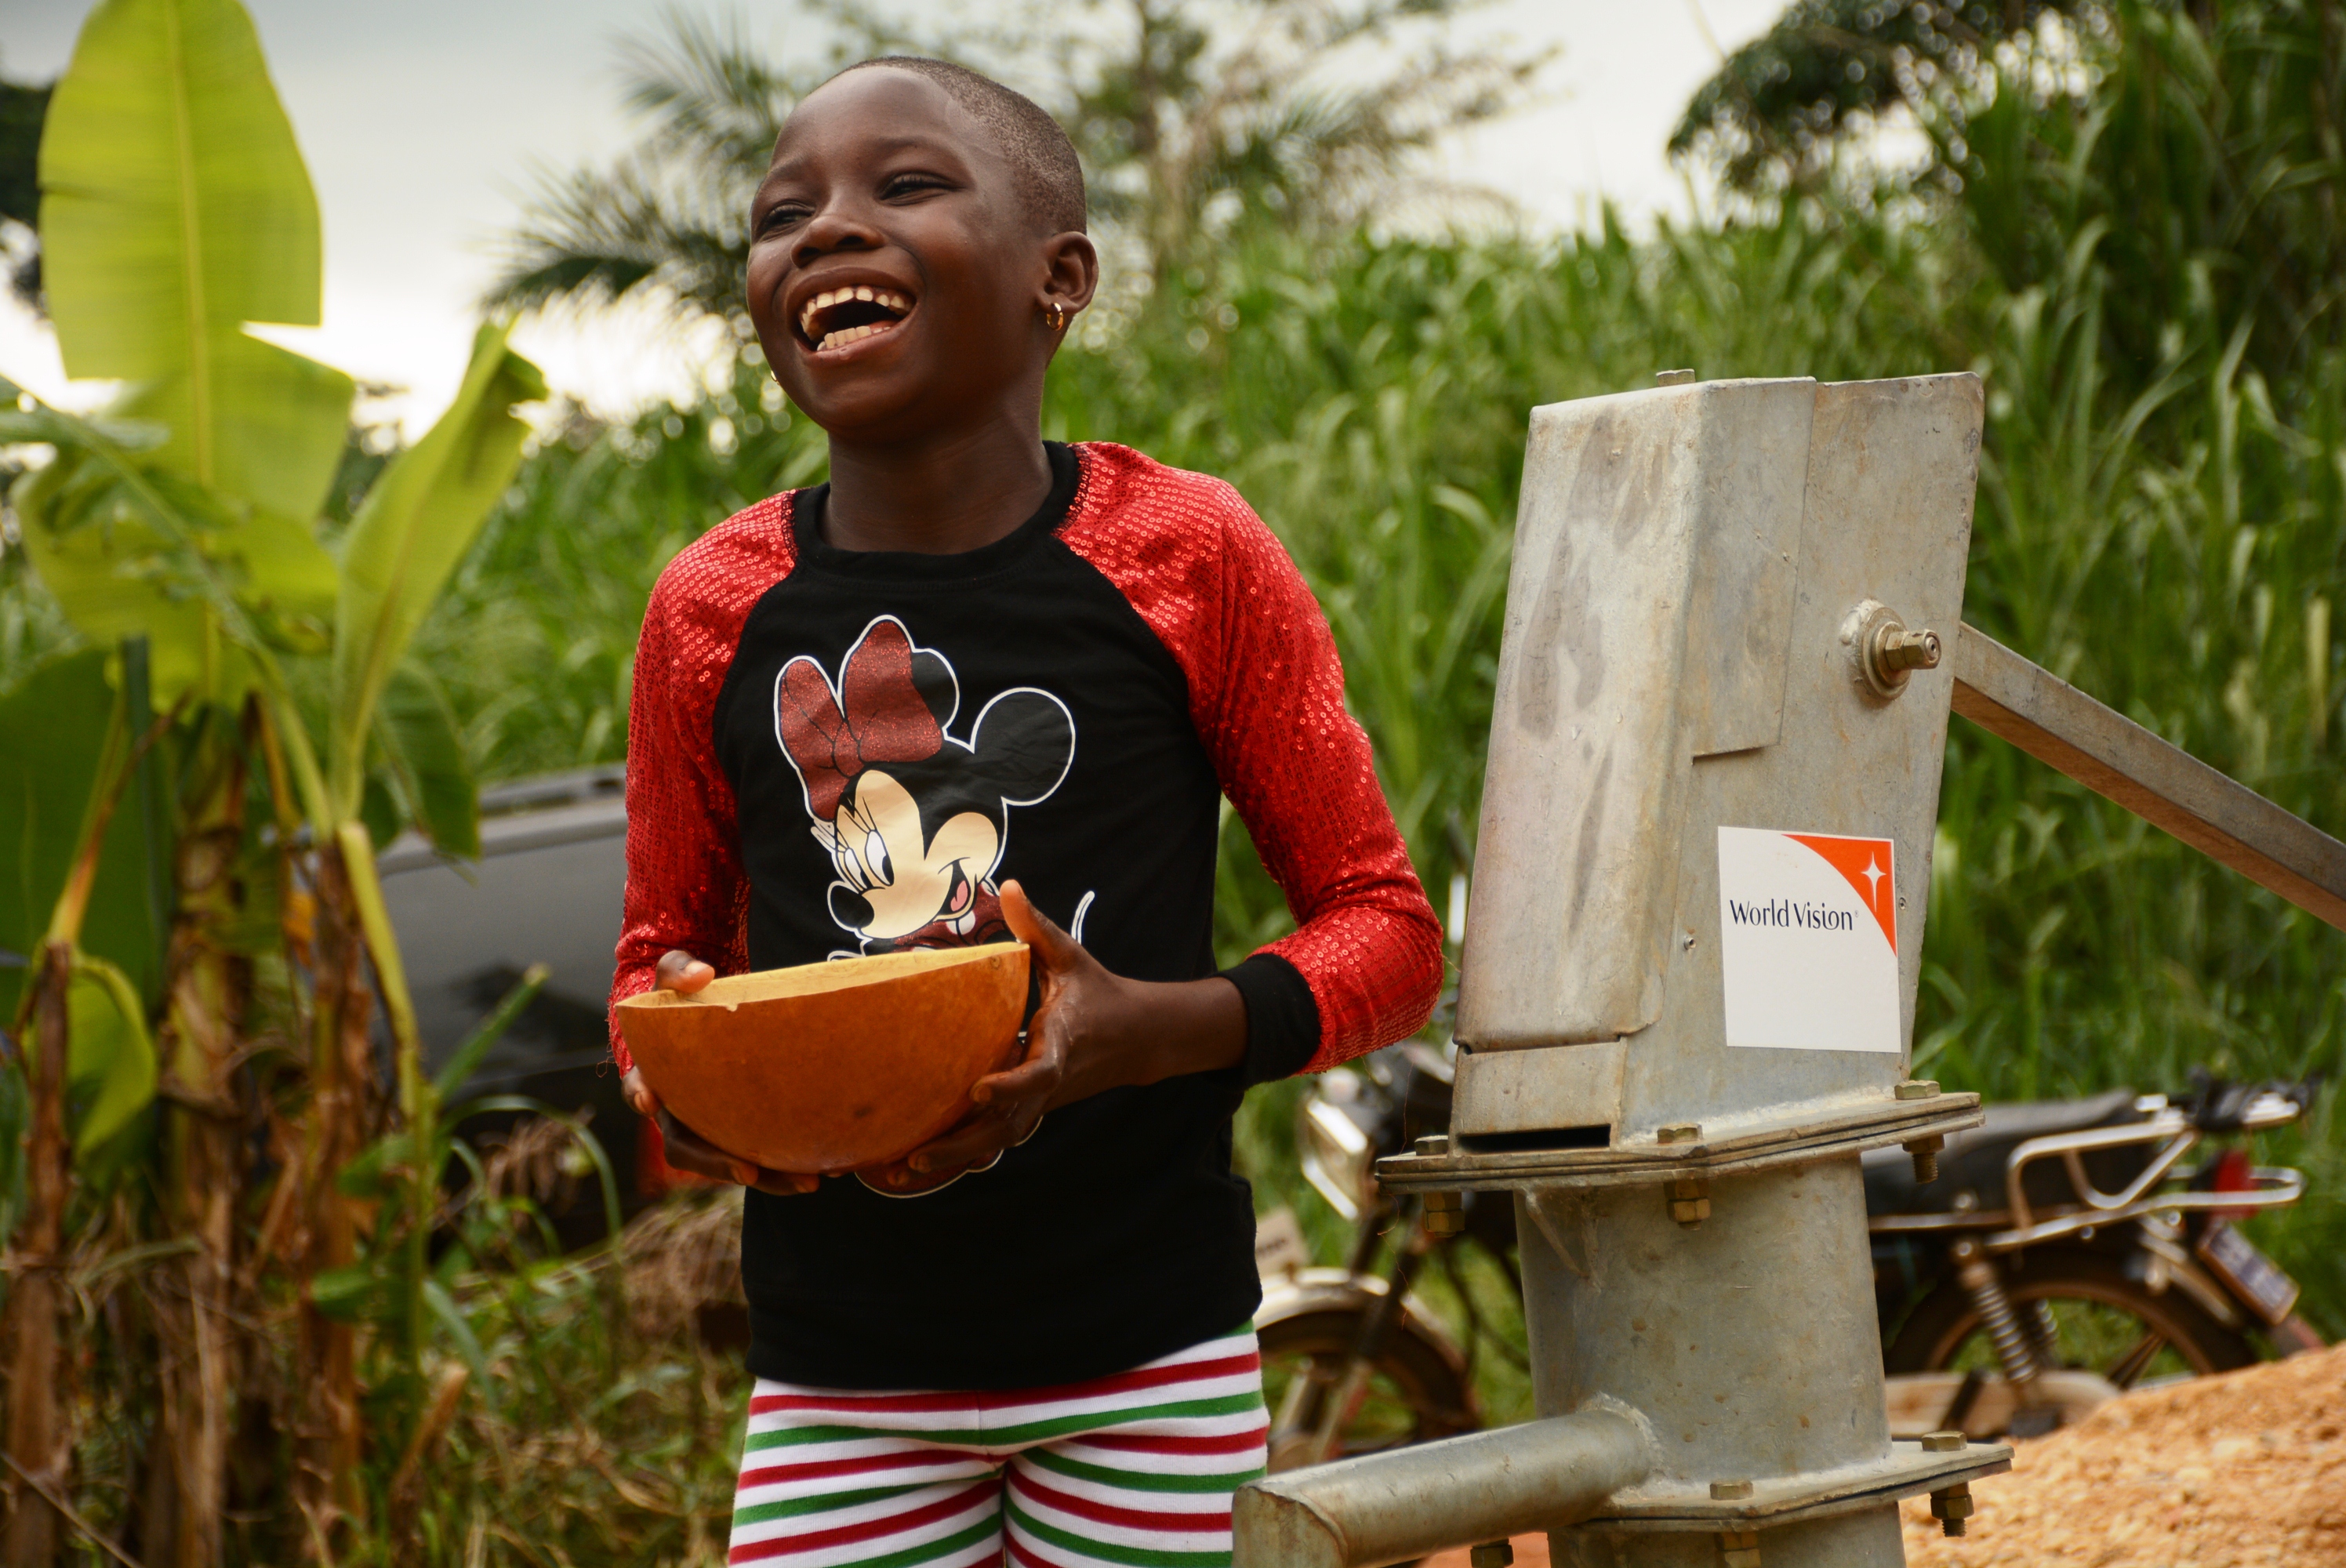 A child excited to drink the first flow of water from the bore hole constructed by World Vision in partnership with Accra Brewery Limited.